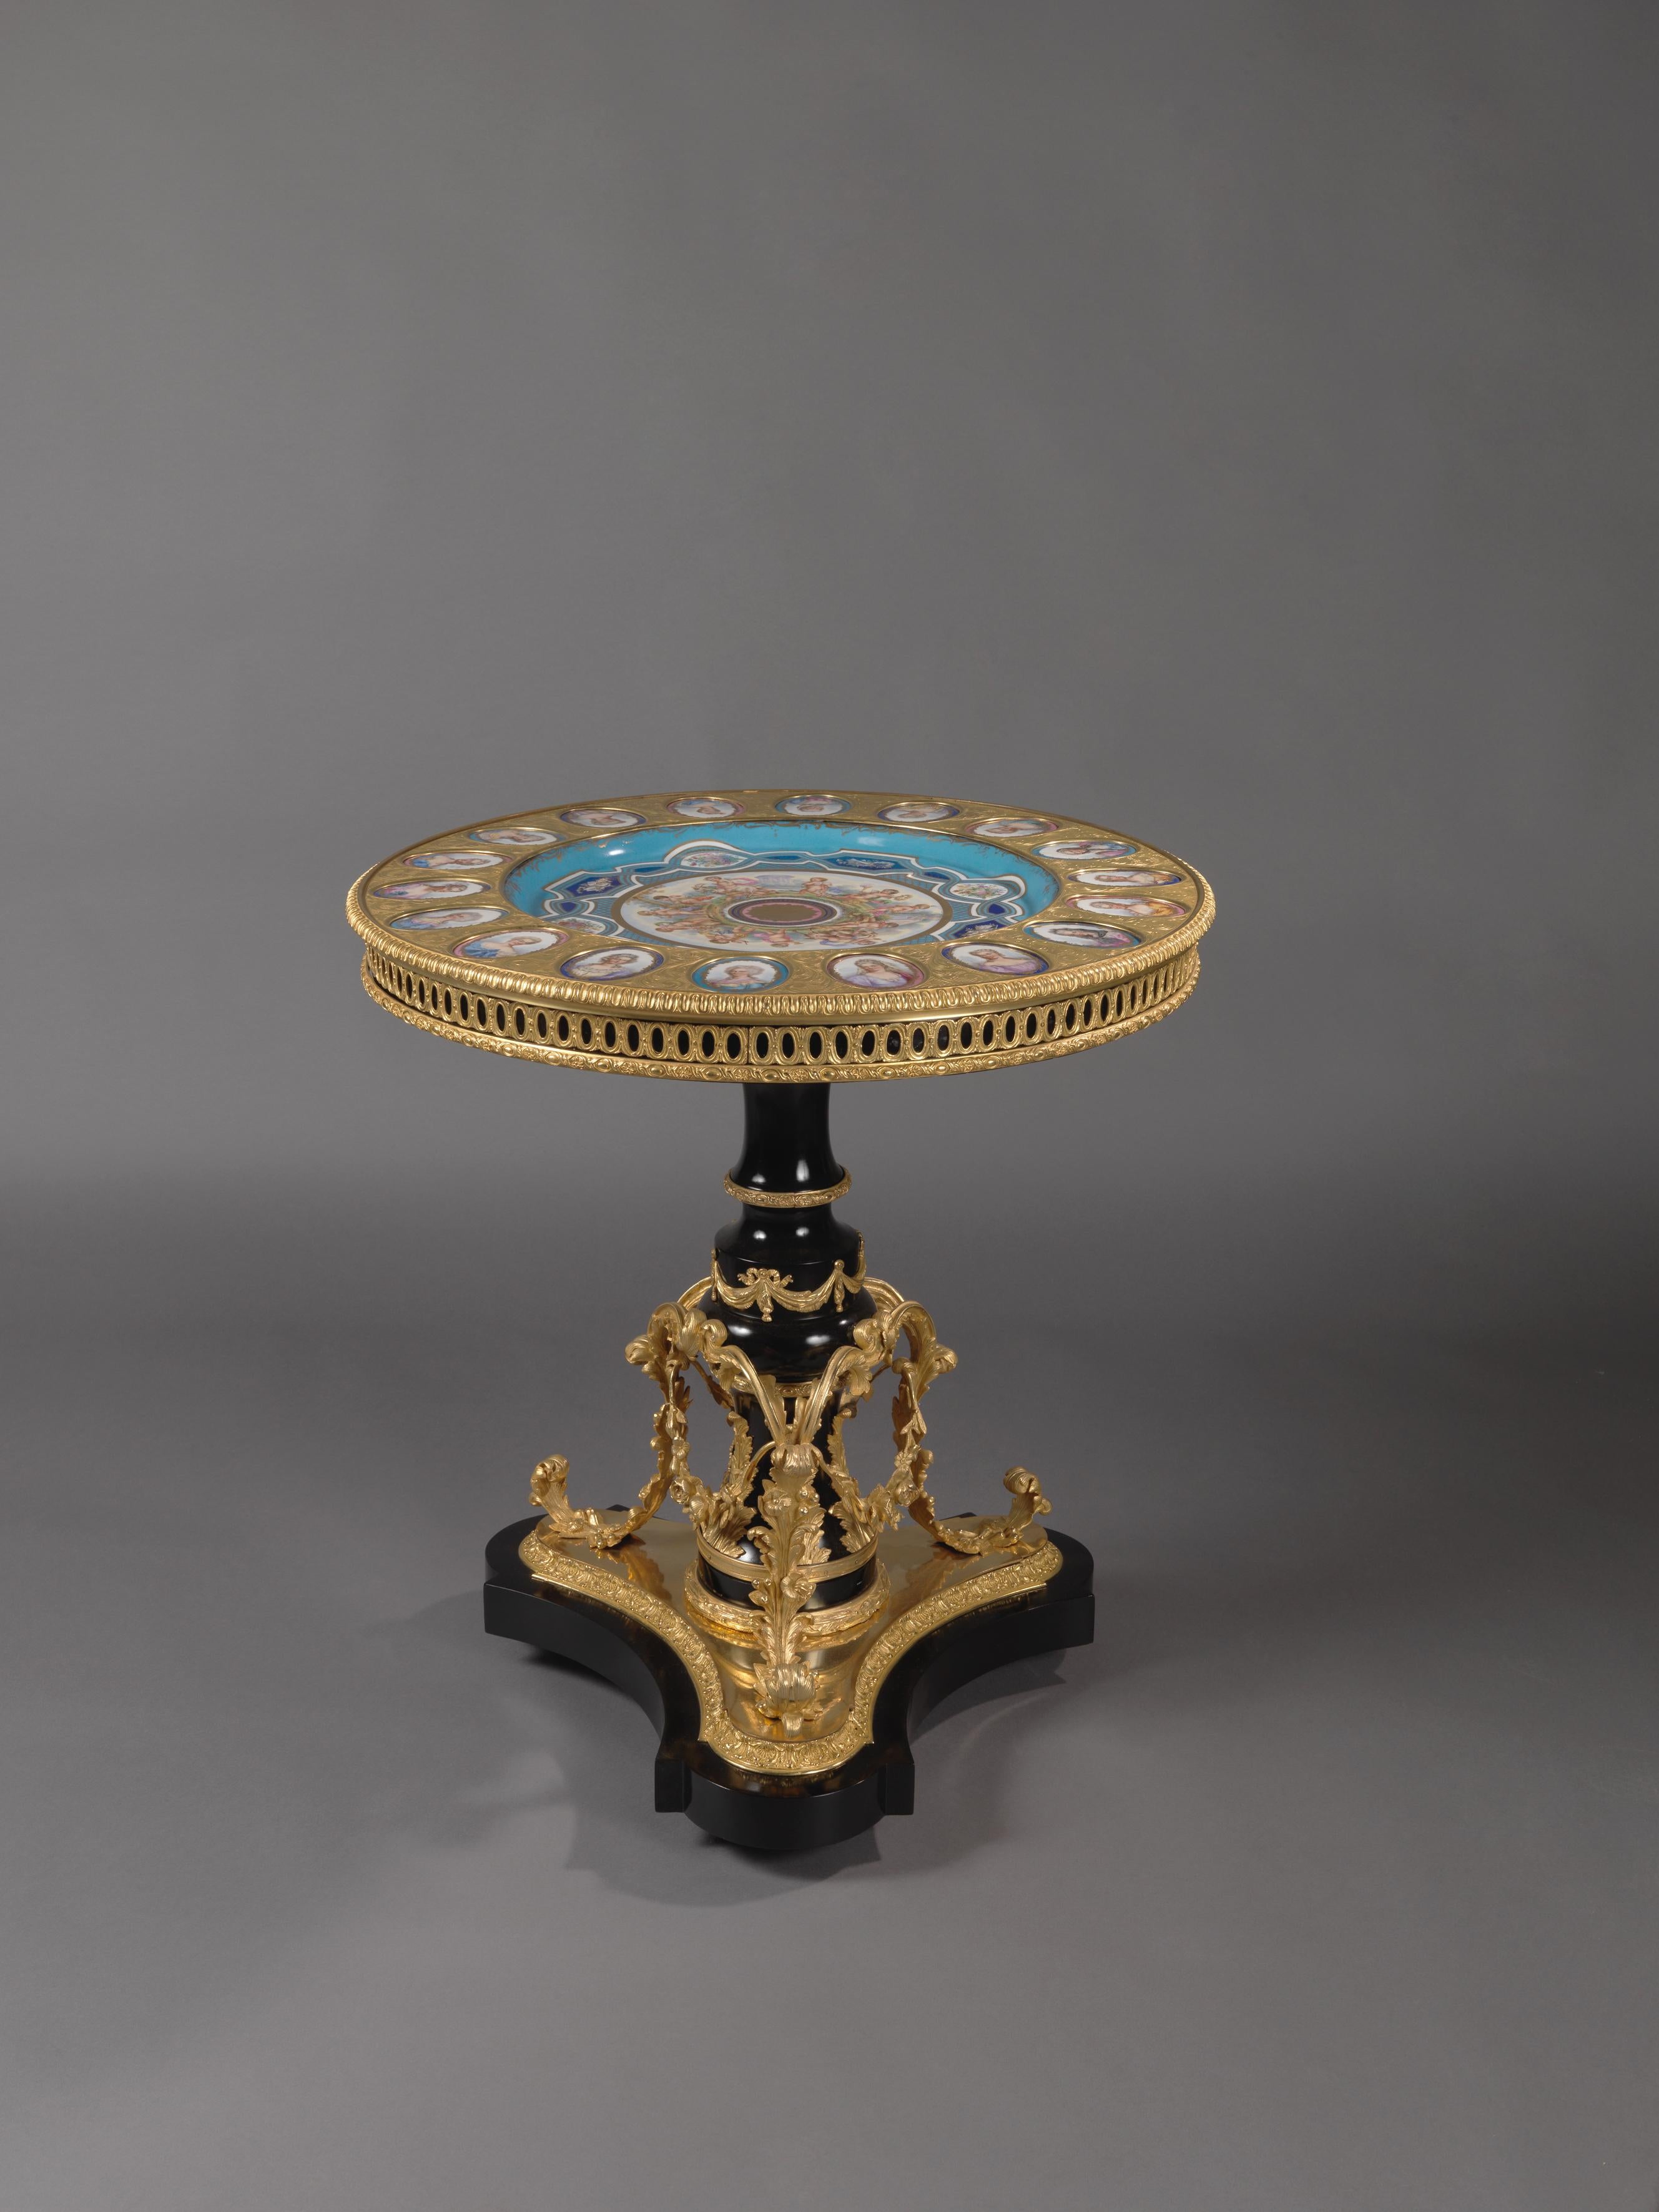 A fine Louis XVI style gilt bronze-mounted ebonised gueridon with Sèvres-style porcelain plaques.

French, circa 1870. 

Stamped to the reverse of the gilt-bronze mounts ‘HB’.

The porcelain plaques with underglaze interlaced Sèvres marks to